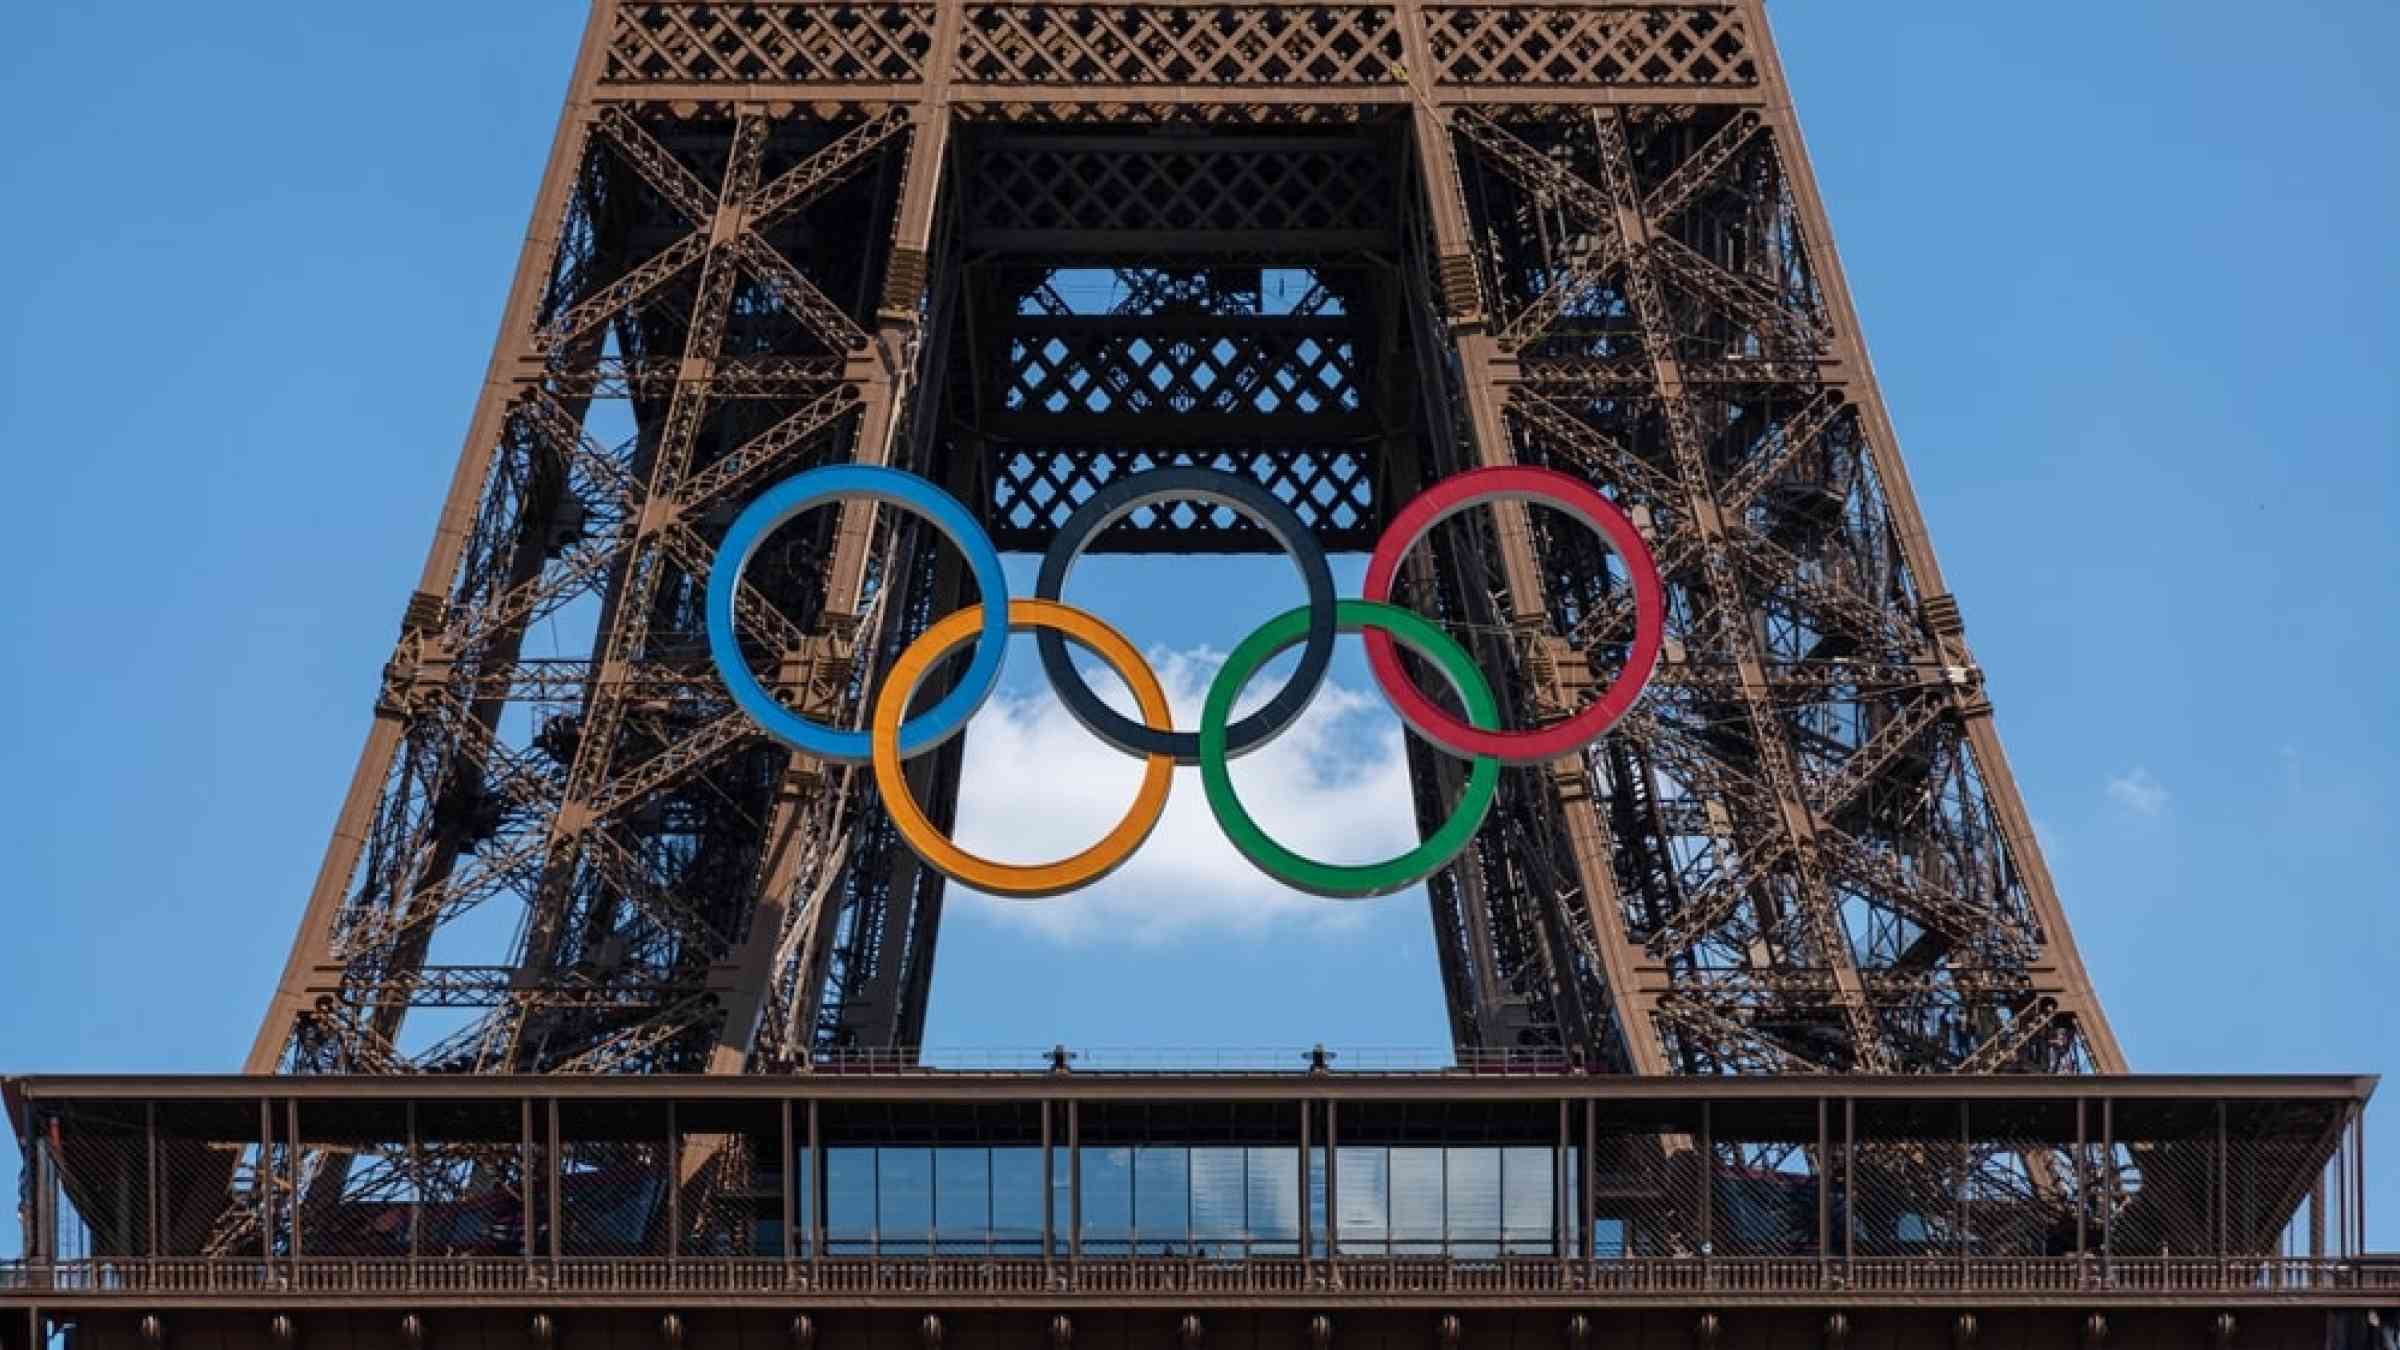 The Olympic Rings installed on the Eiffel Tower ahead of the Paris 2024 Olympic Games.